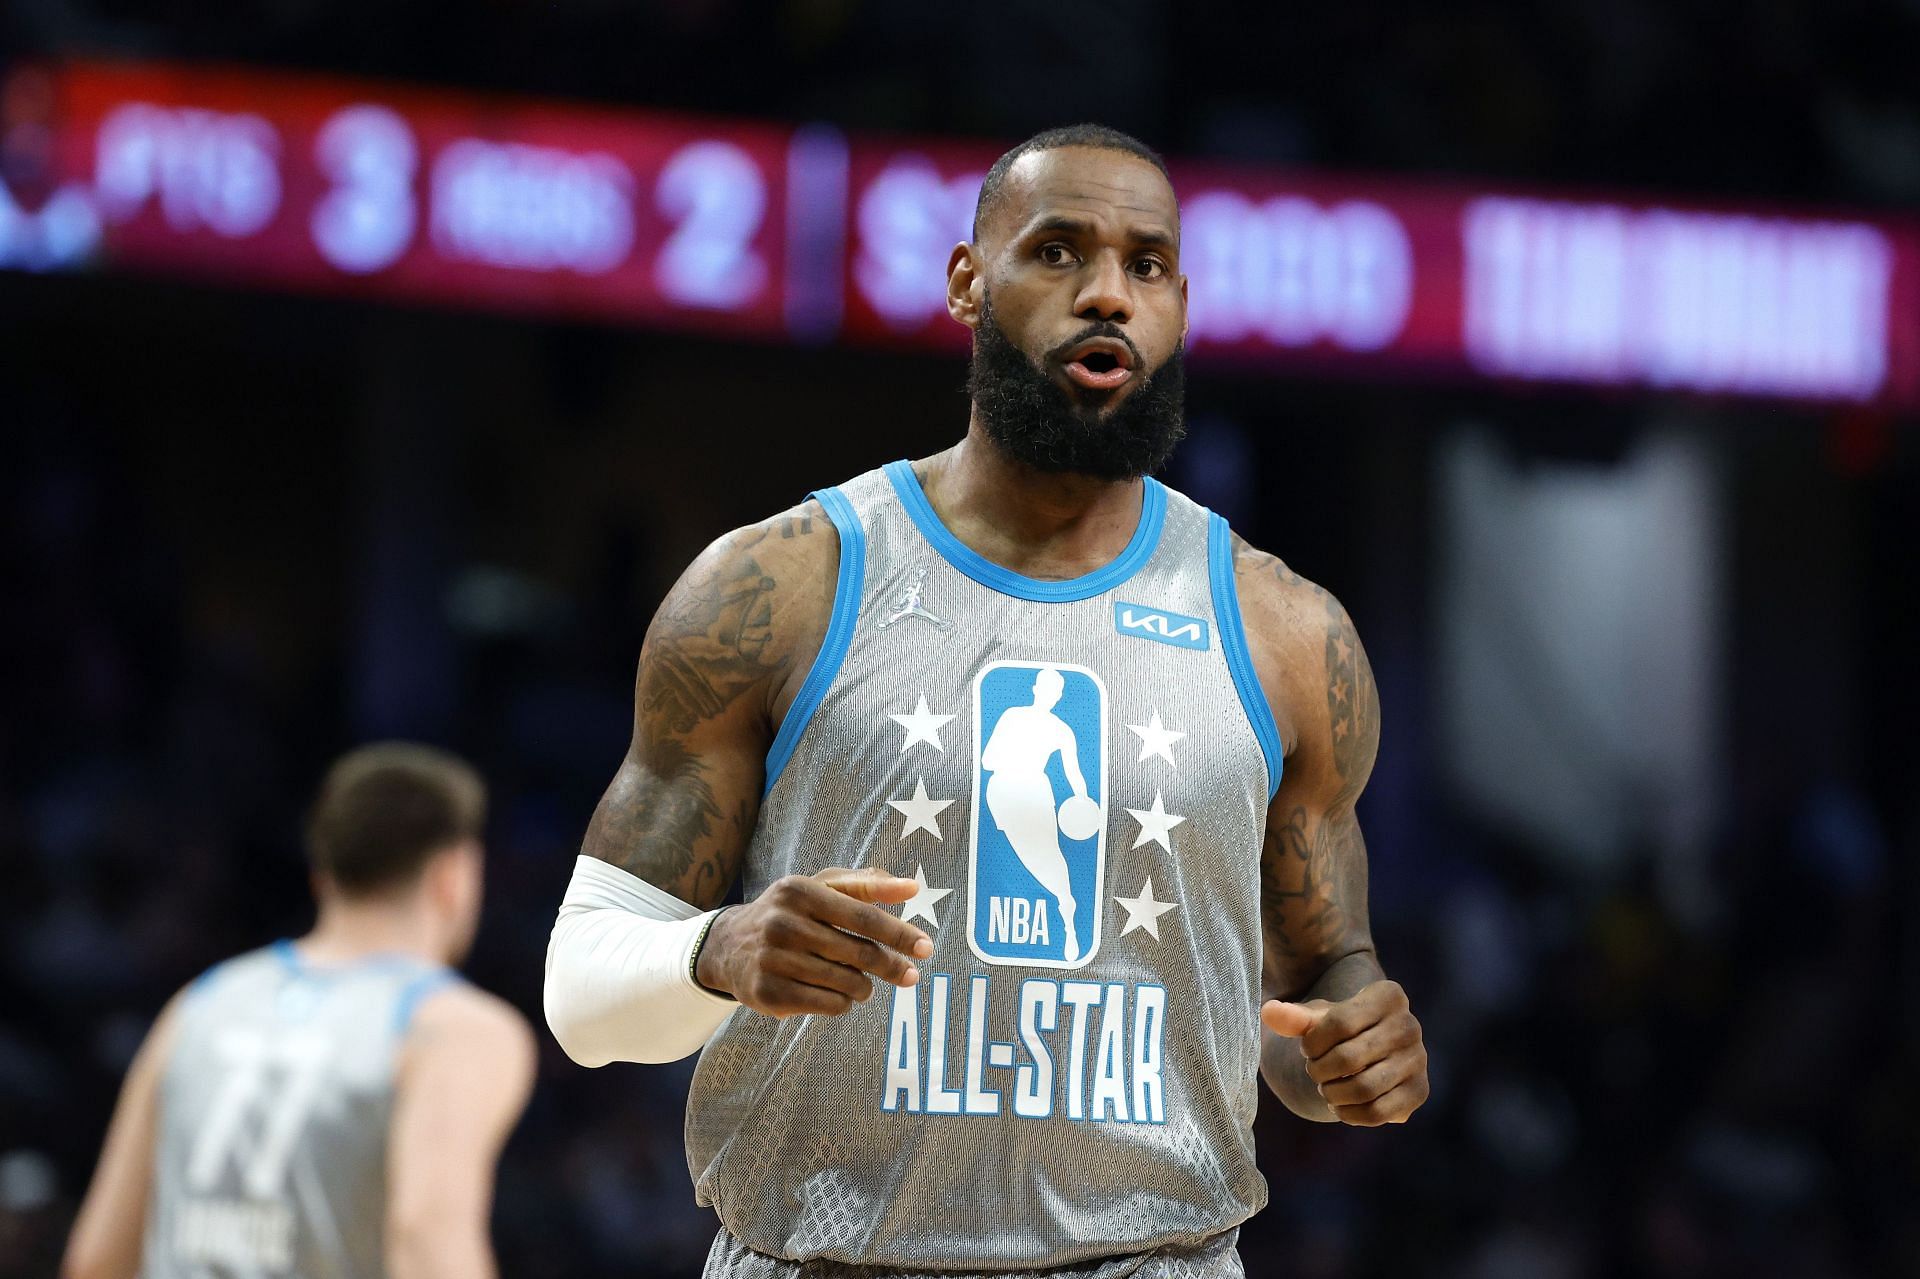 LeBron James during the 2022 NBA All-Star Game